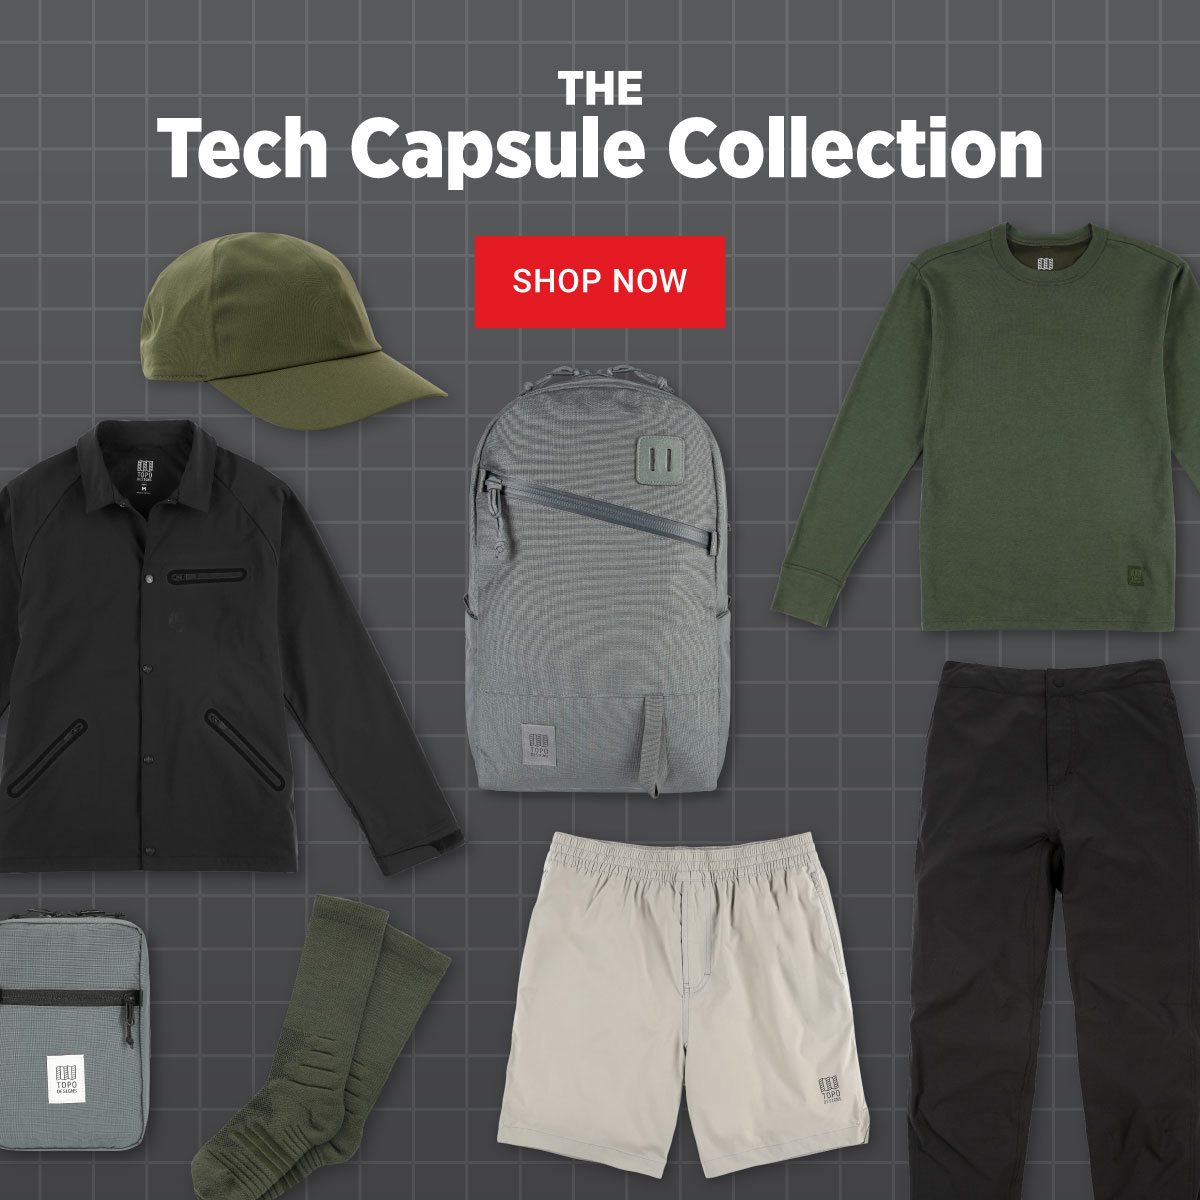 THE TECH CAPSULE COLLECTION